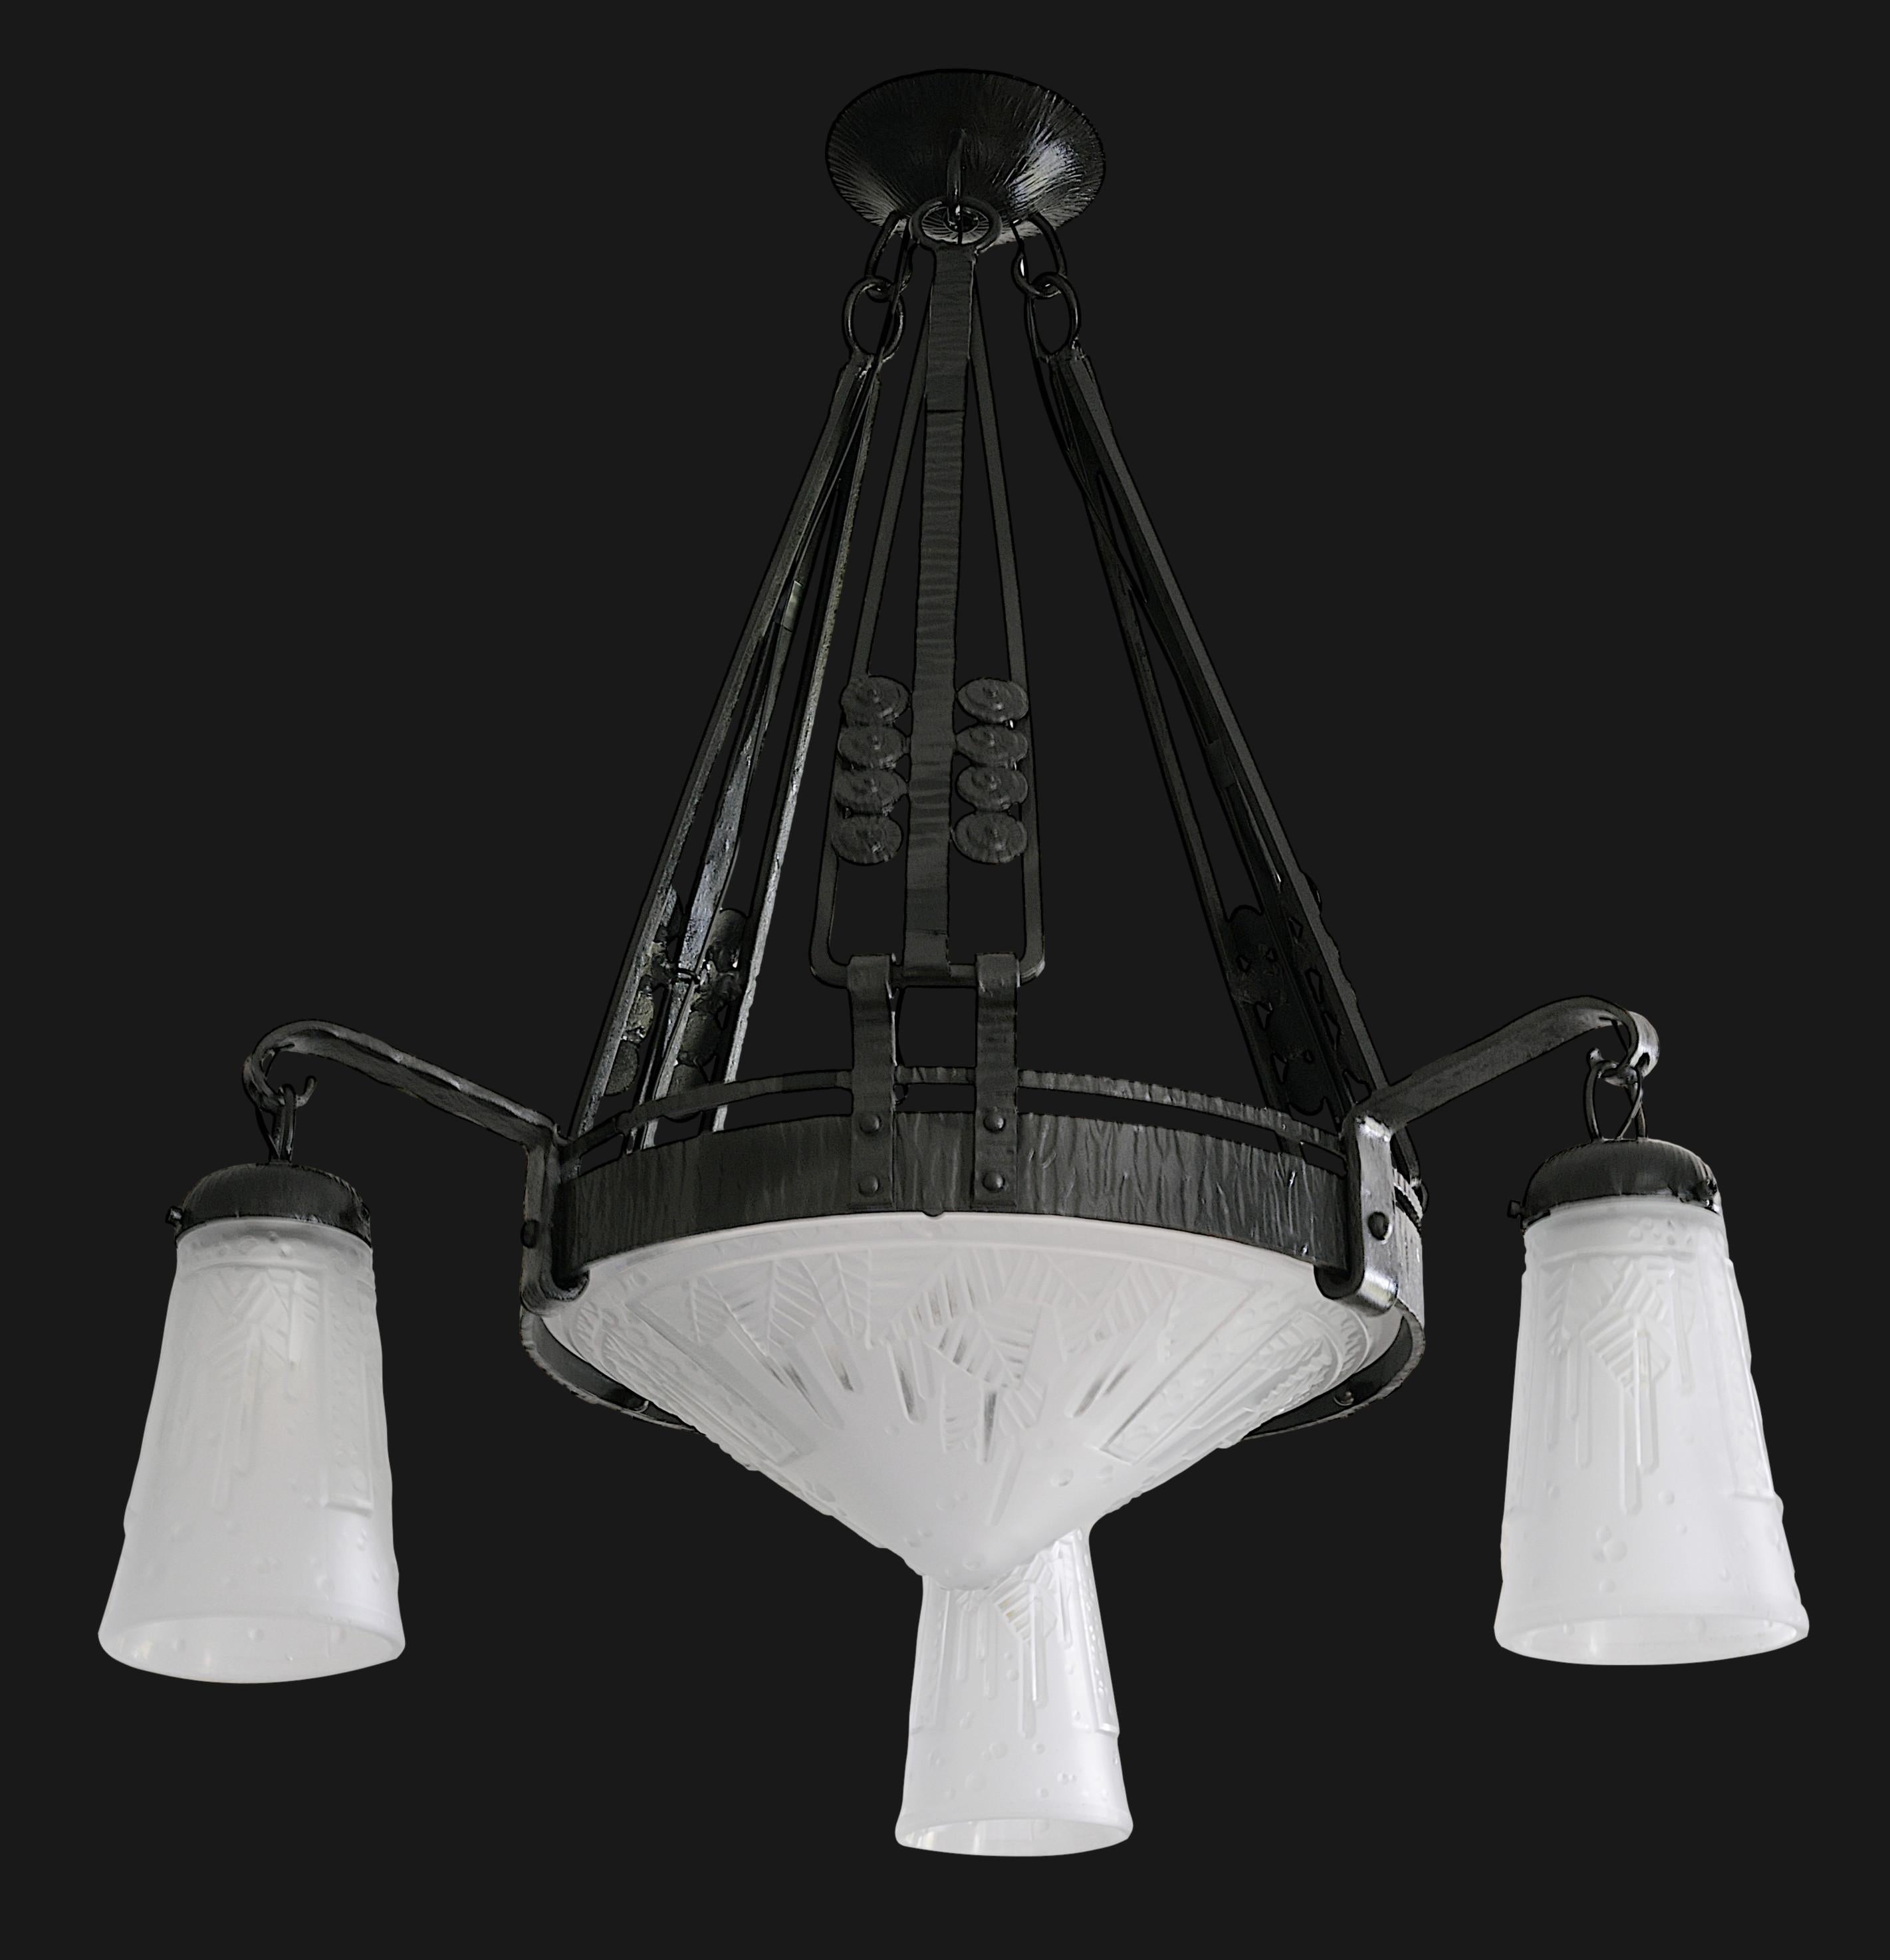 French Art Deco chandelier by MULLER FRERES (Luneville) and Marcel VASSEUR, France, circa 1925. Sharply defined frosted glass shades by Muller Freres. Superb wrought-iron fixture by Marcel Vasseur. Height : 24.8